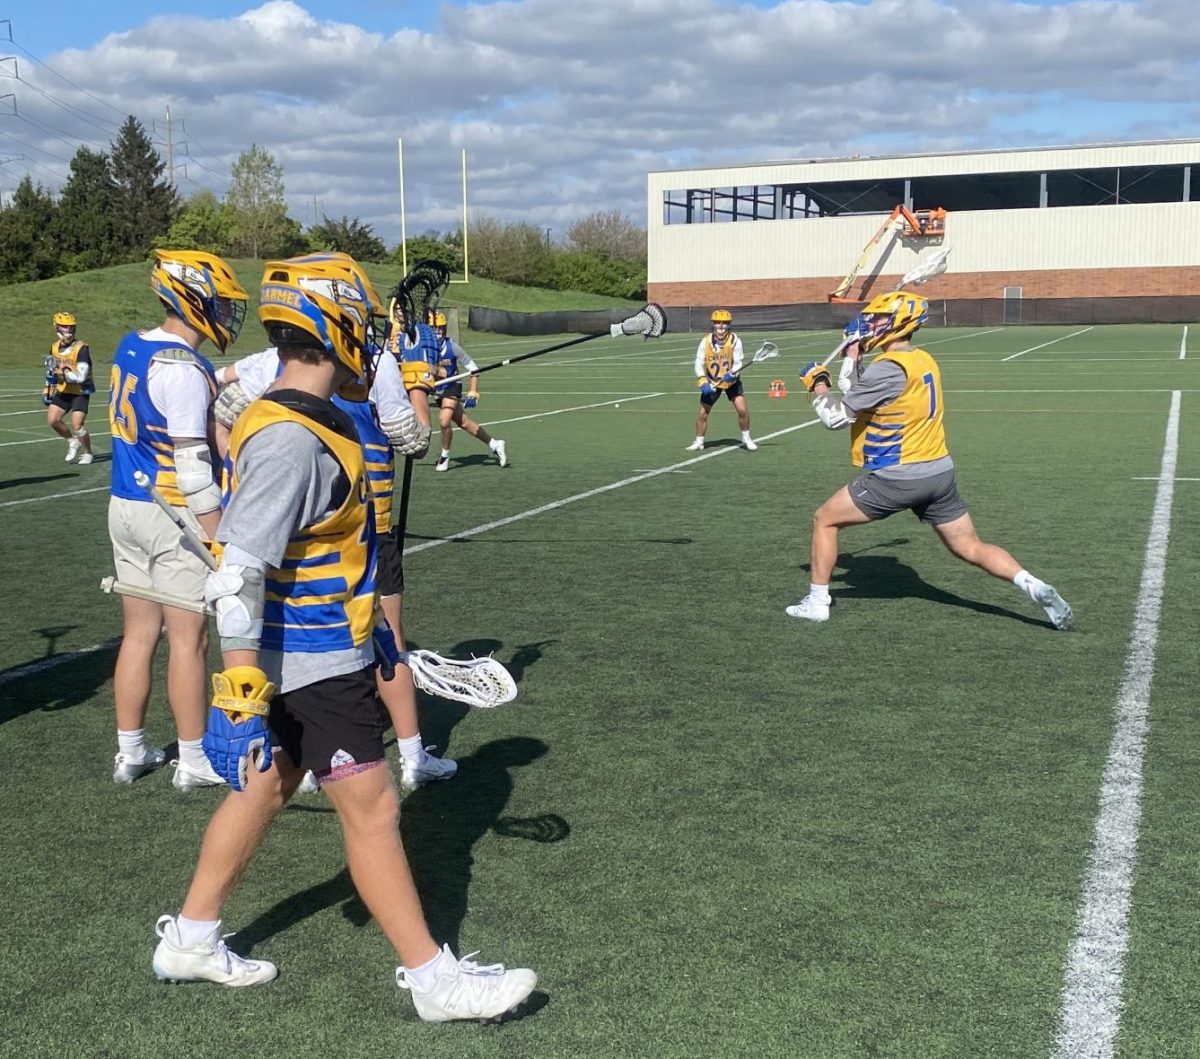 Members of the Lacrosse team play in a scrimmage on April 24. Head Coach Keith Allen said offensive players have been using scrimmages to practice their plays and sets.